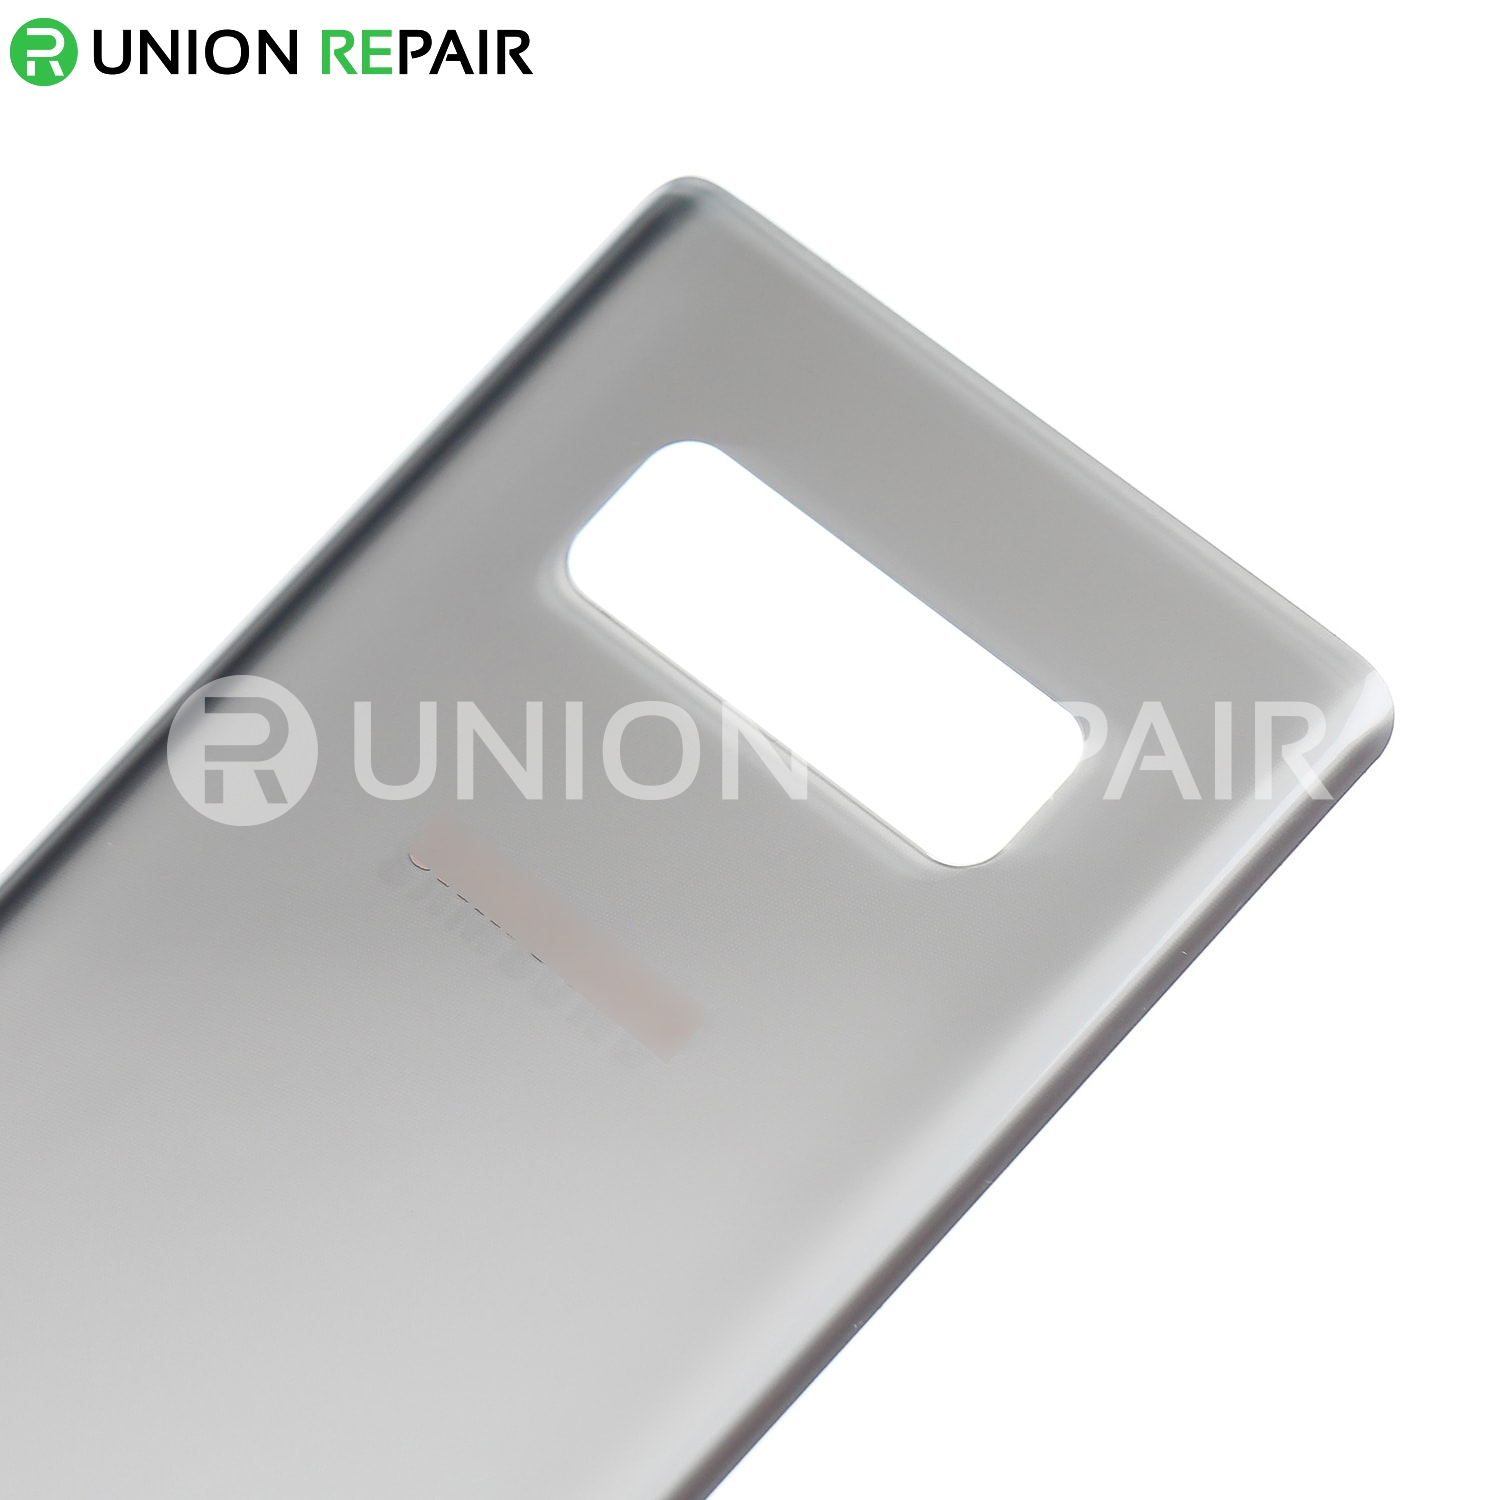 Replacement for Samsung Galaxy Note 8 SM-N950 Back Cover - Silver